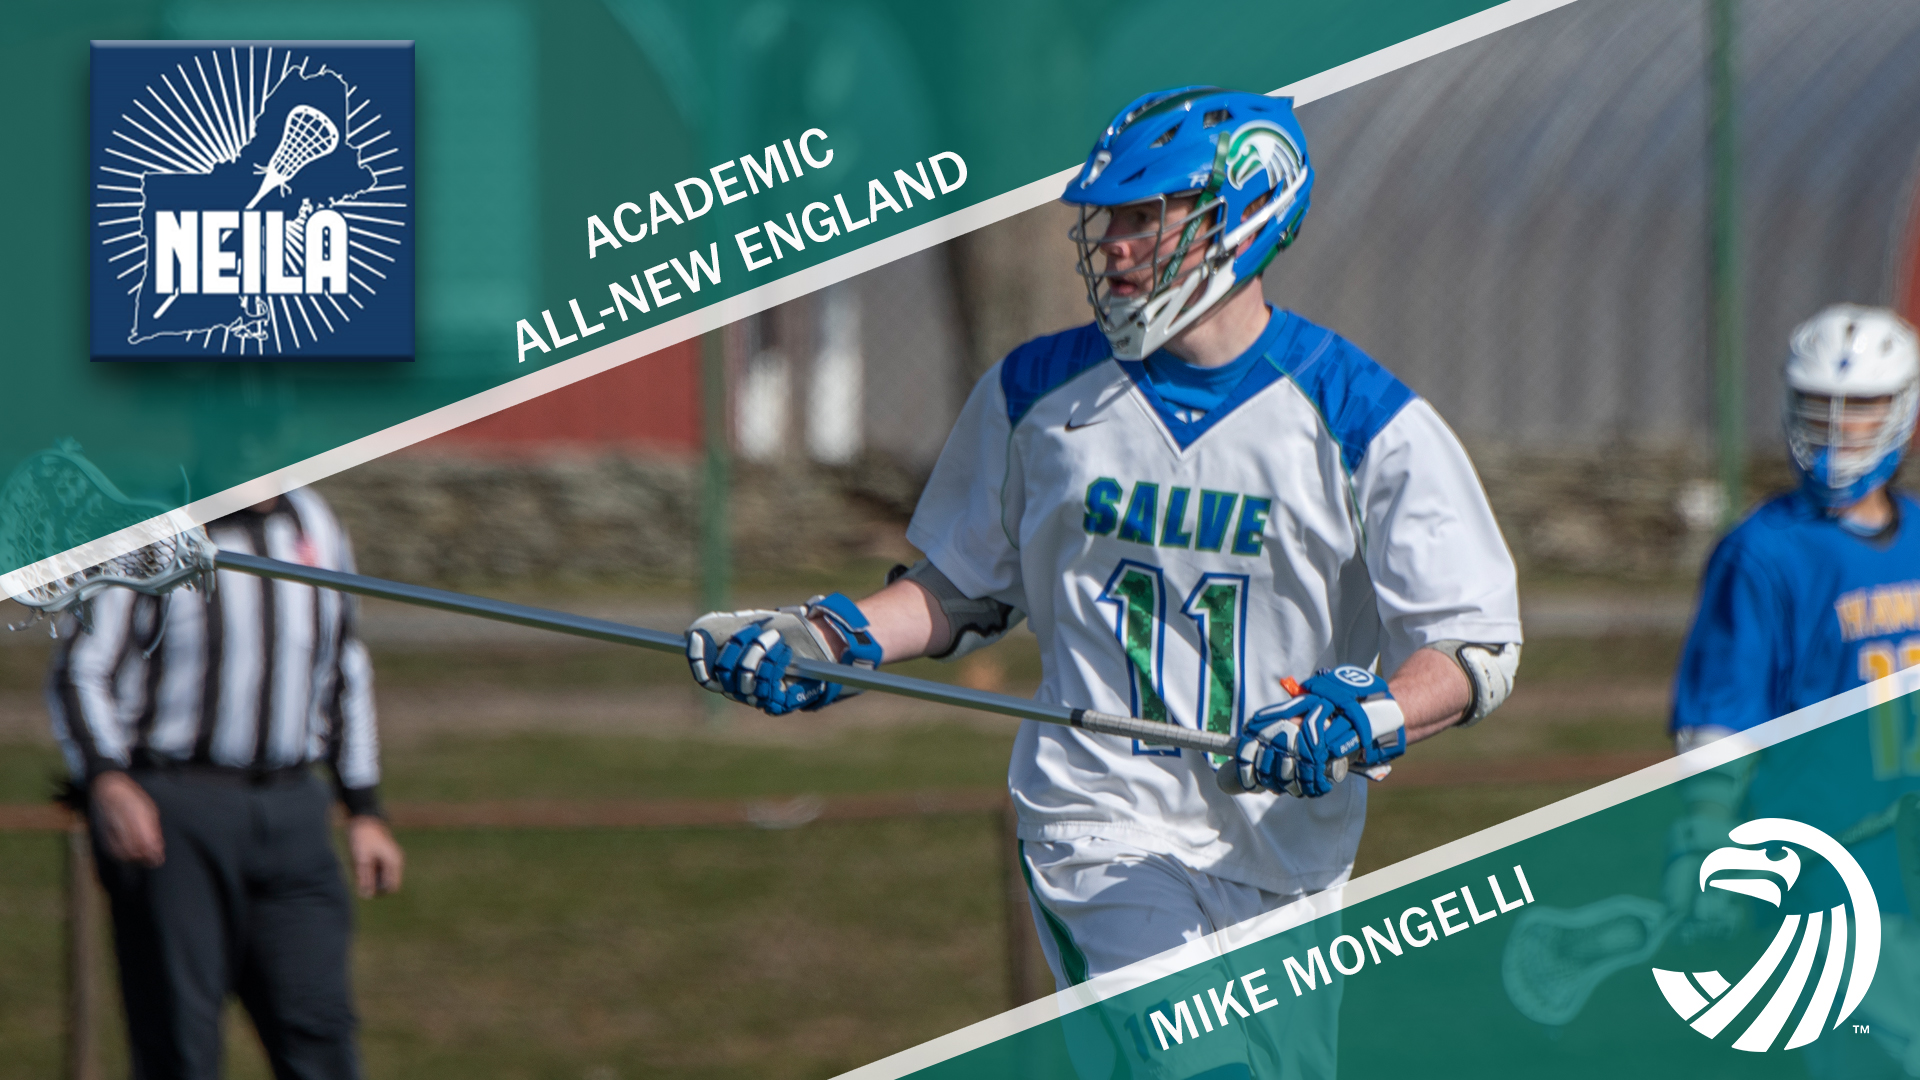 Mike Mongelli was named to the NEILA Academic All-New England team.